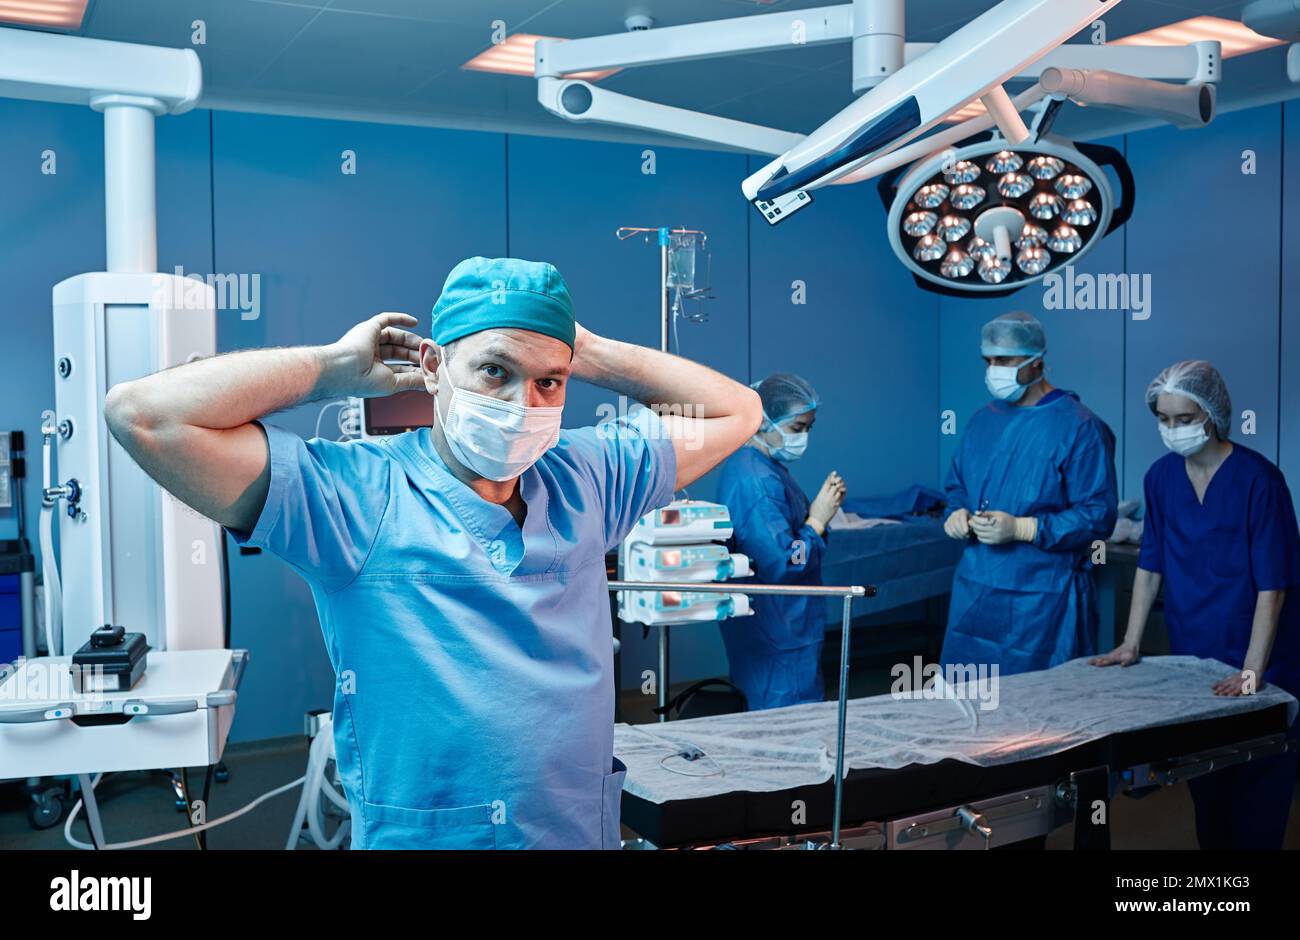 Surgical team getting ready for beginning of surgical operation in operating room Stock Photo